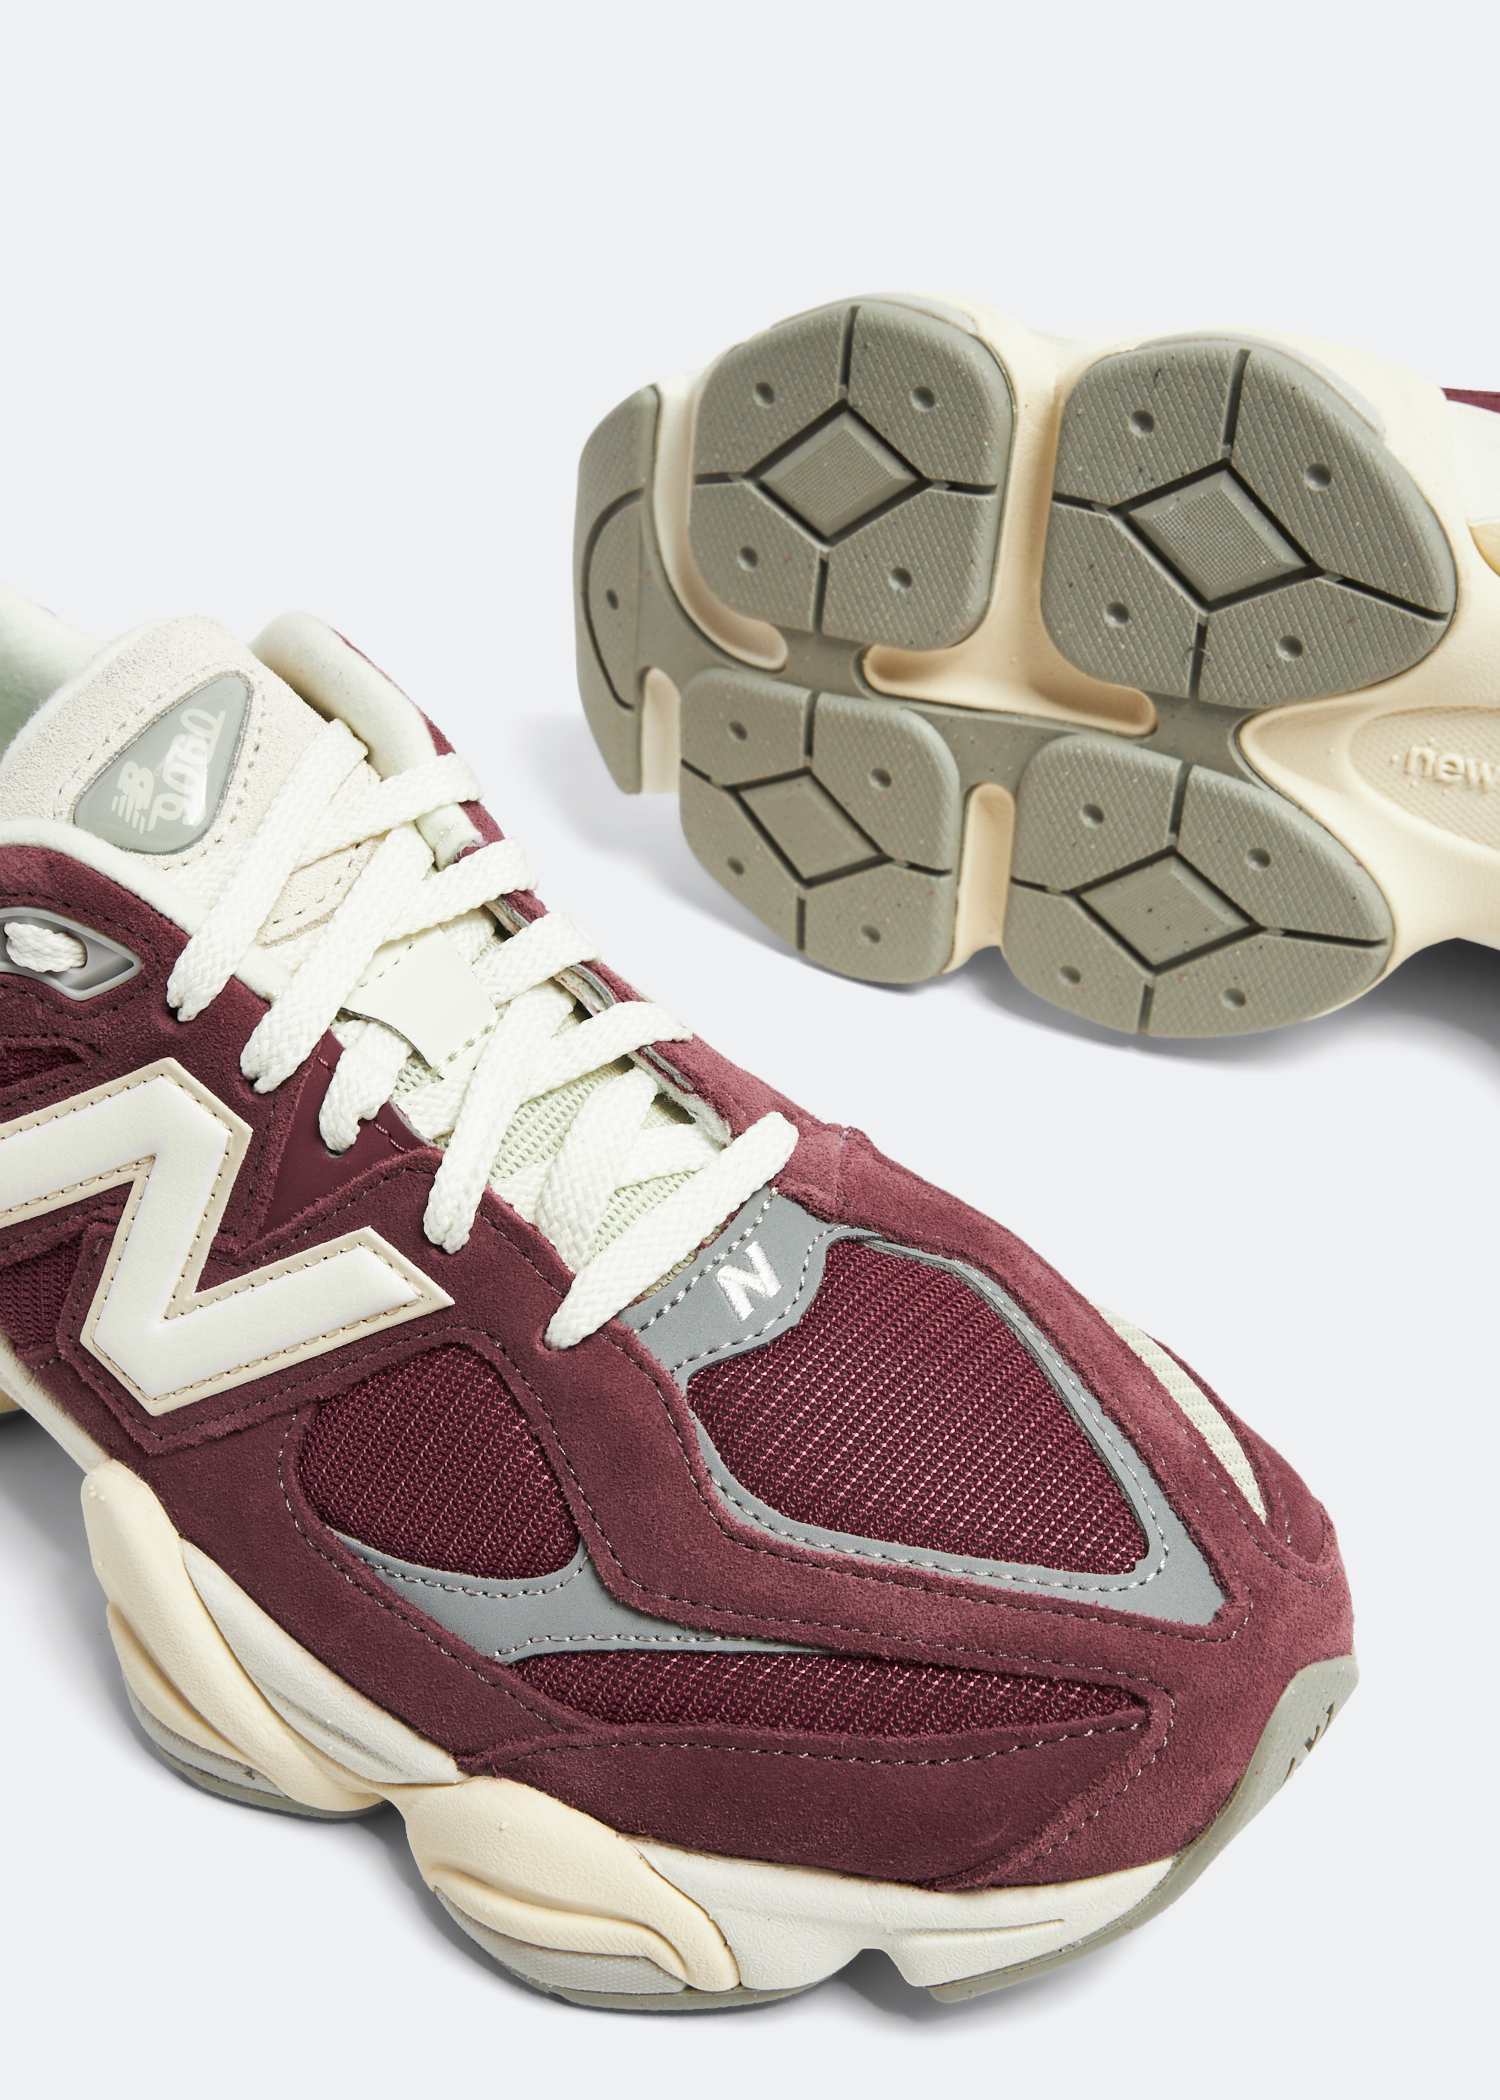 New Balance 9060 sneakers for Women - Burgundy in UAE | Level Shoes